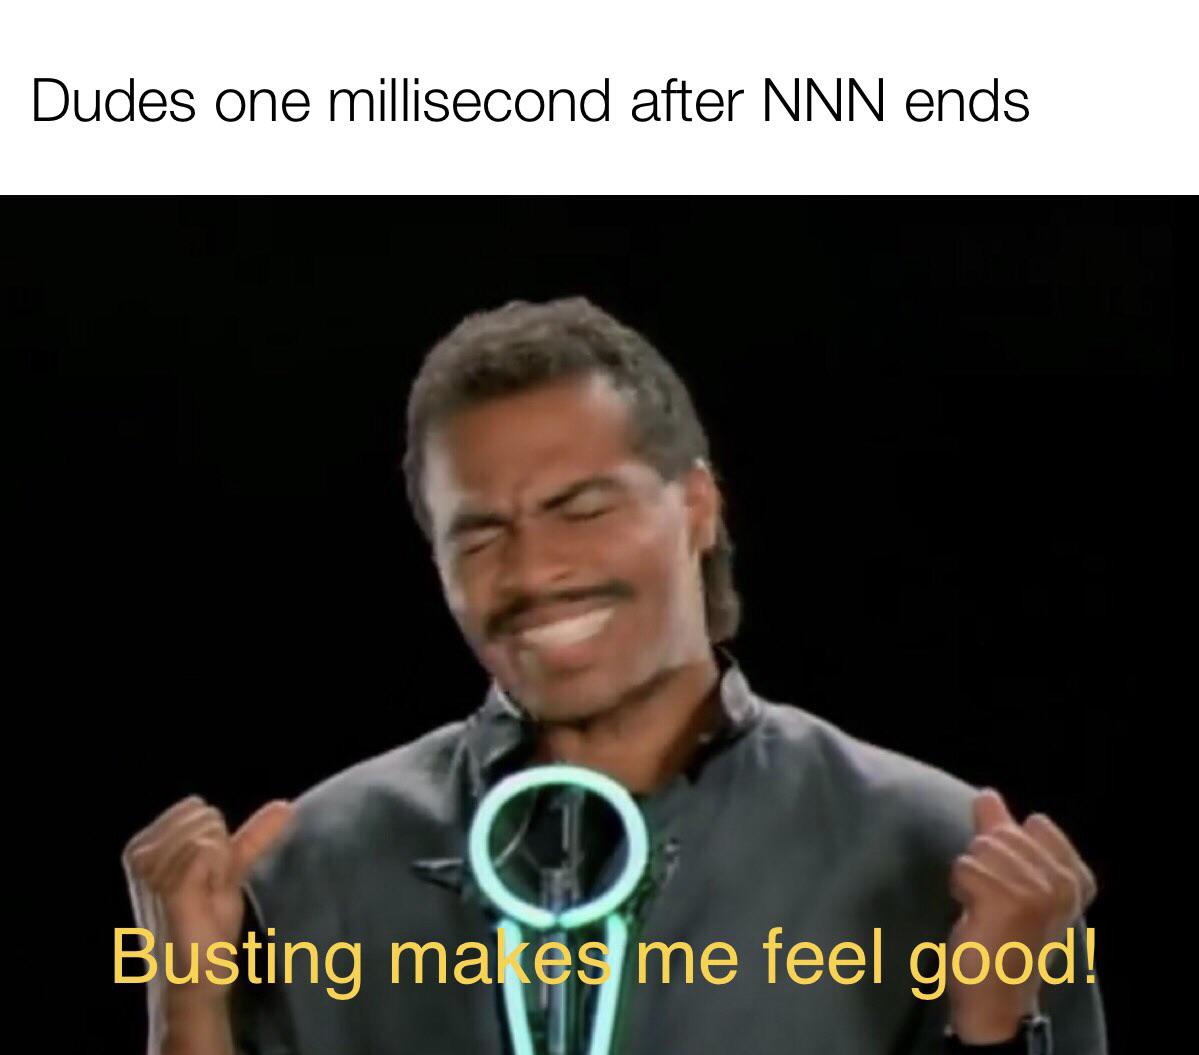 speech - Dudes one millisecond after Nnn ends Busting makes me feel good!